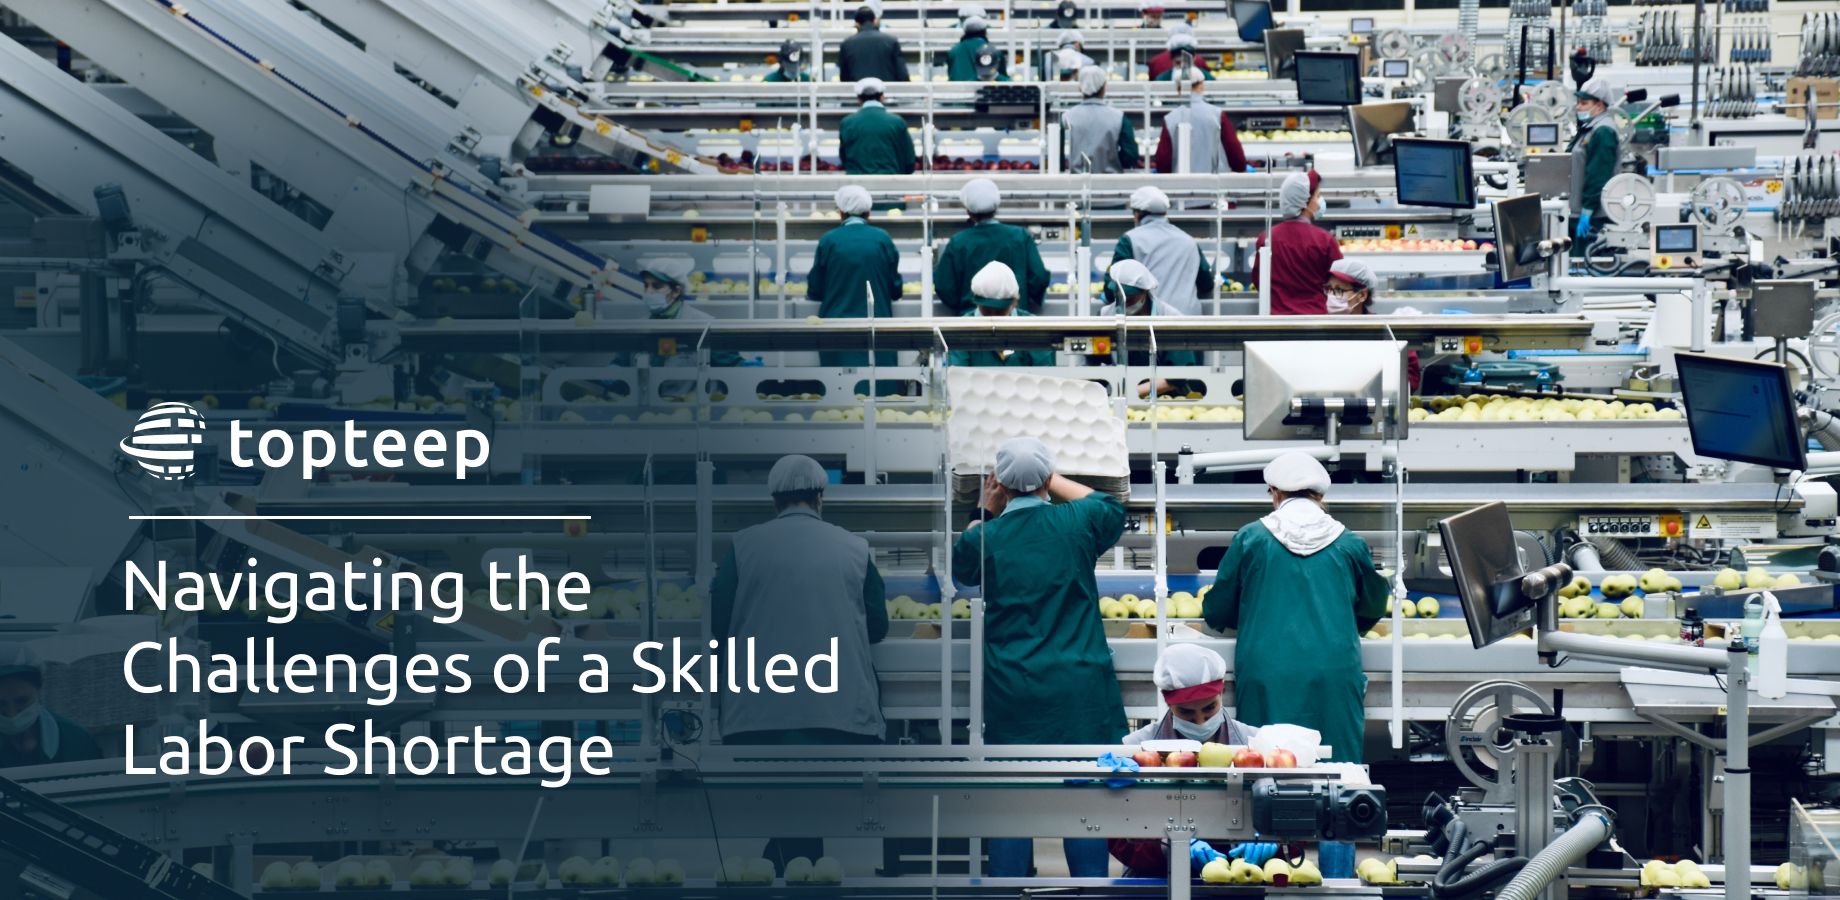 Navigating the Challenges of a Skilled Labor Shortage